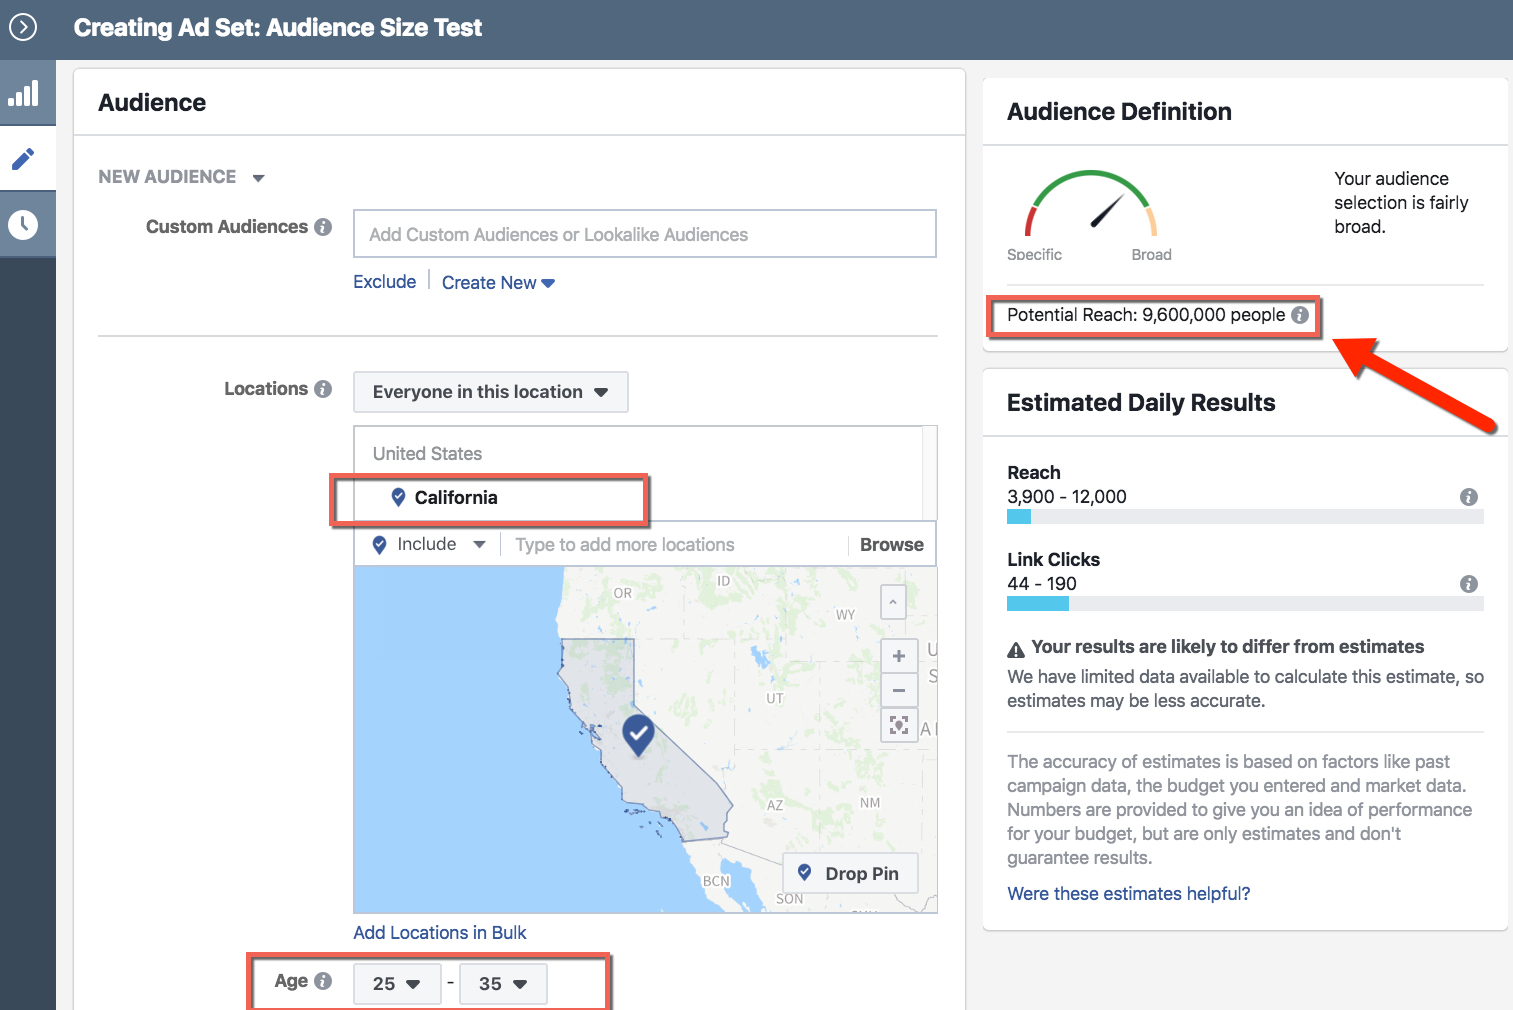 Facebook Audience Selection - Ad Set Level - California Users Aged 25-35